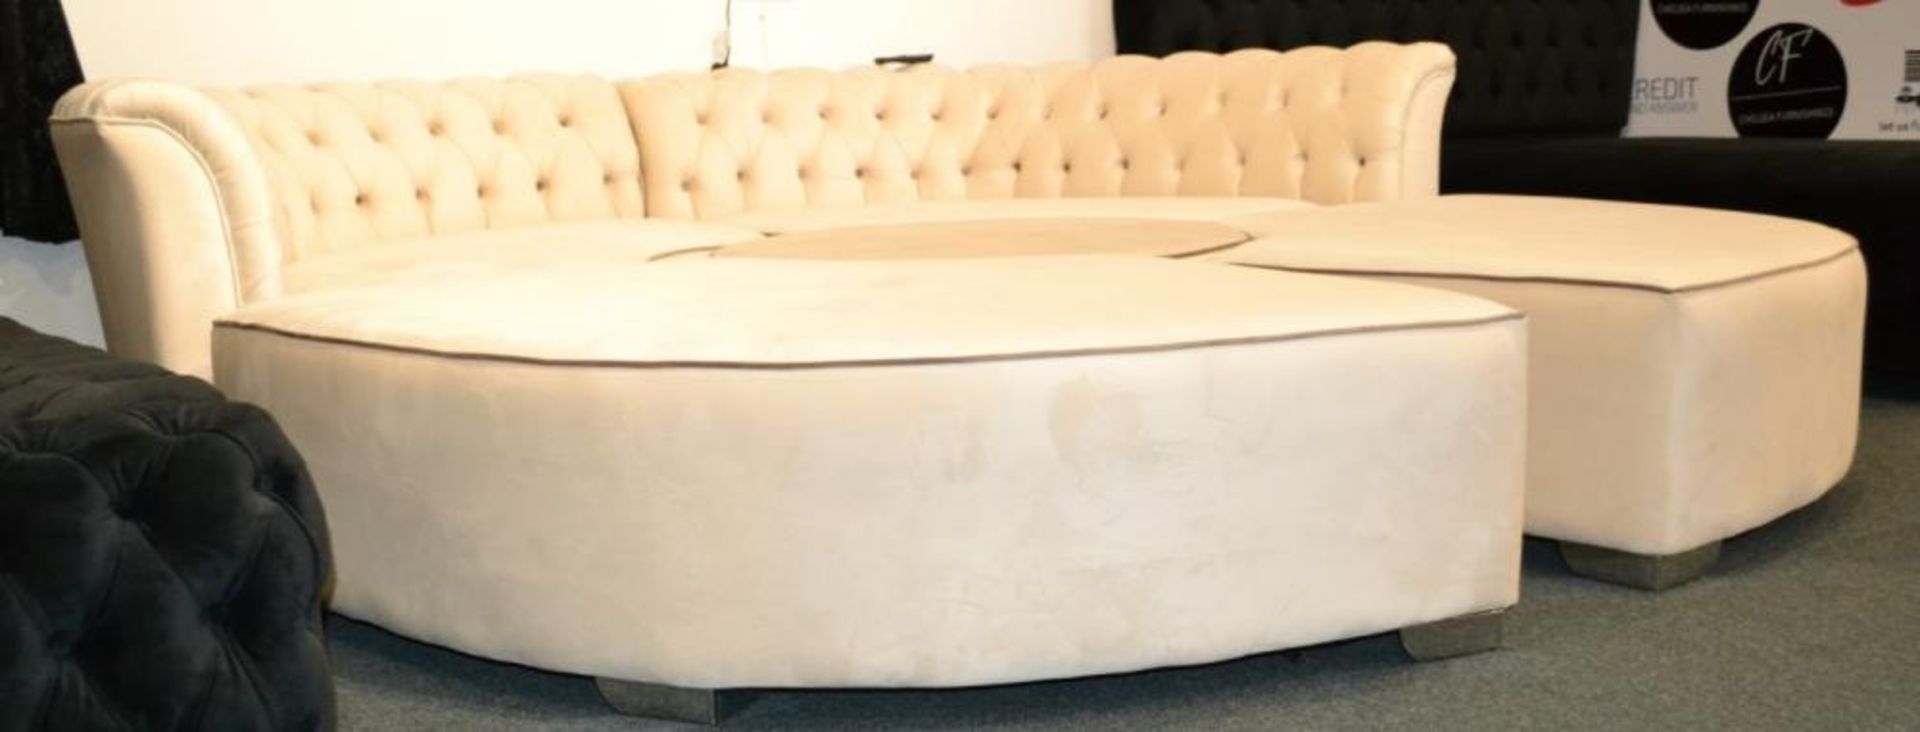 1 x Luxurious Bespoke Cream Velour 5 Piece Sofa Set. A truly beautiful bespoke piece that will give - Image 8 of 8